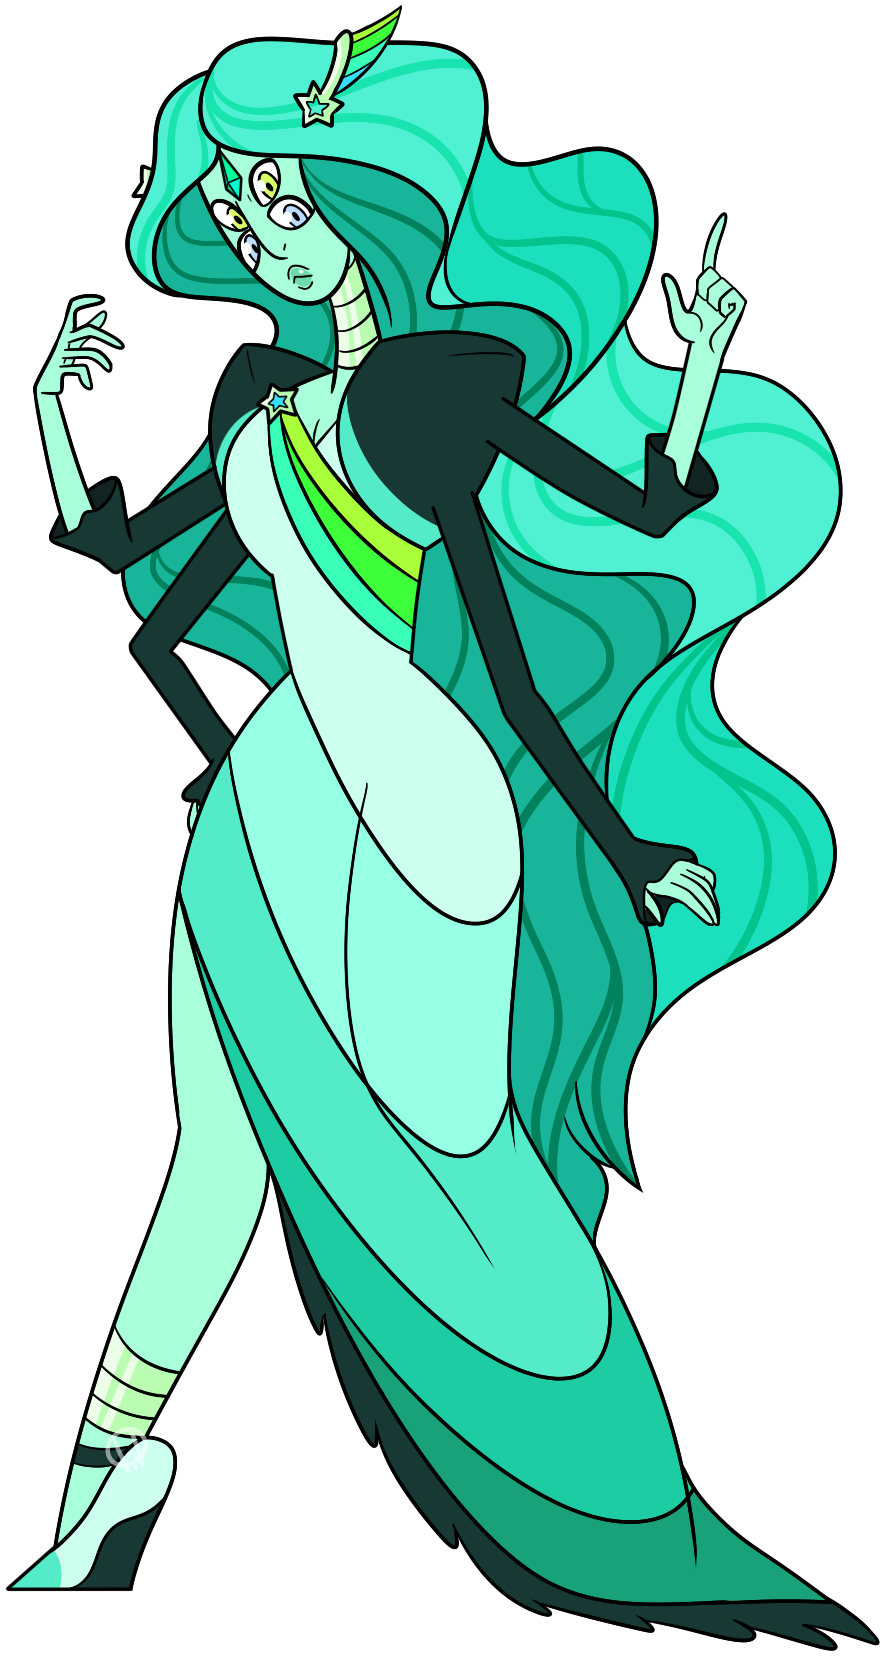 Here's The Prefect Fusion Of Them Together, Their Love - Paraiba Tourmaline Steven Universe (885x1657)